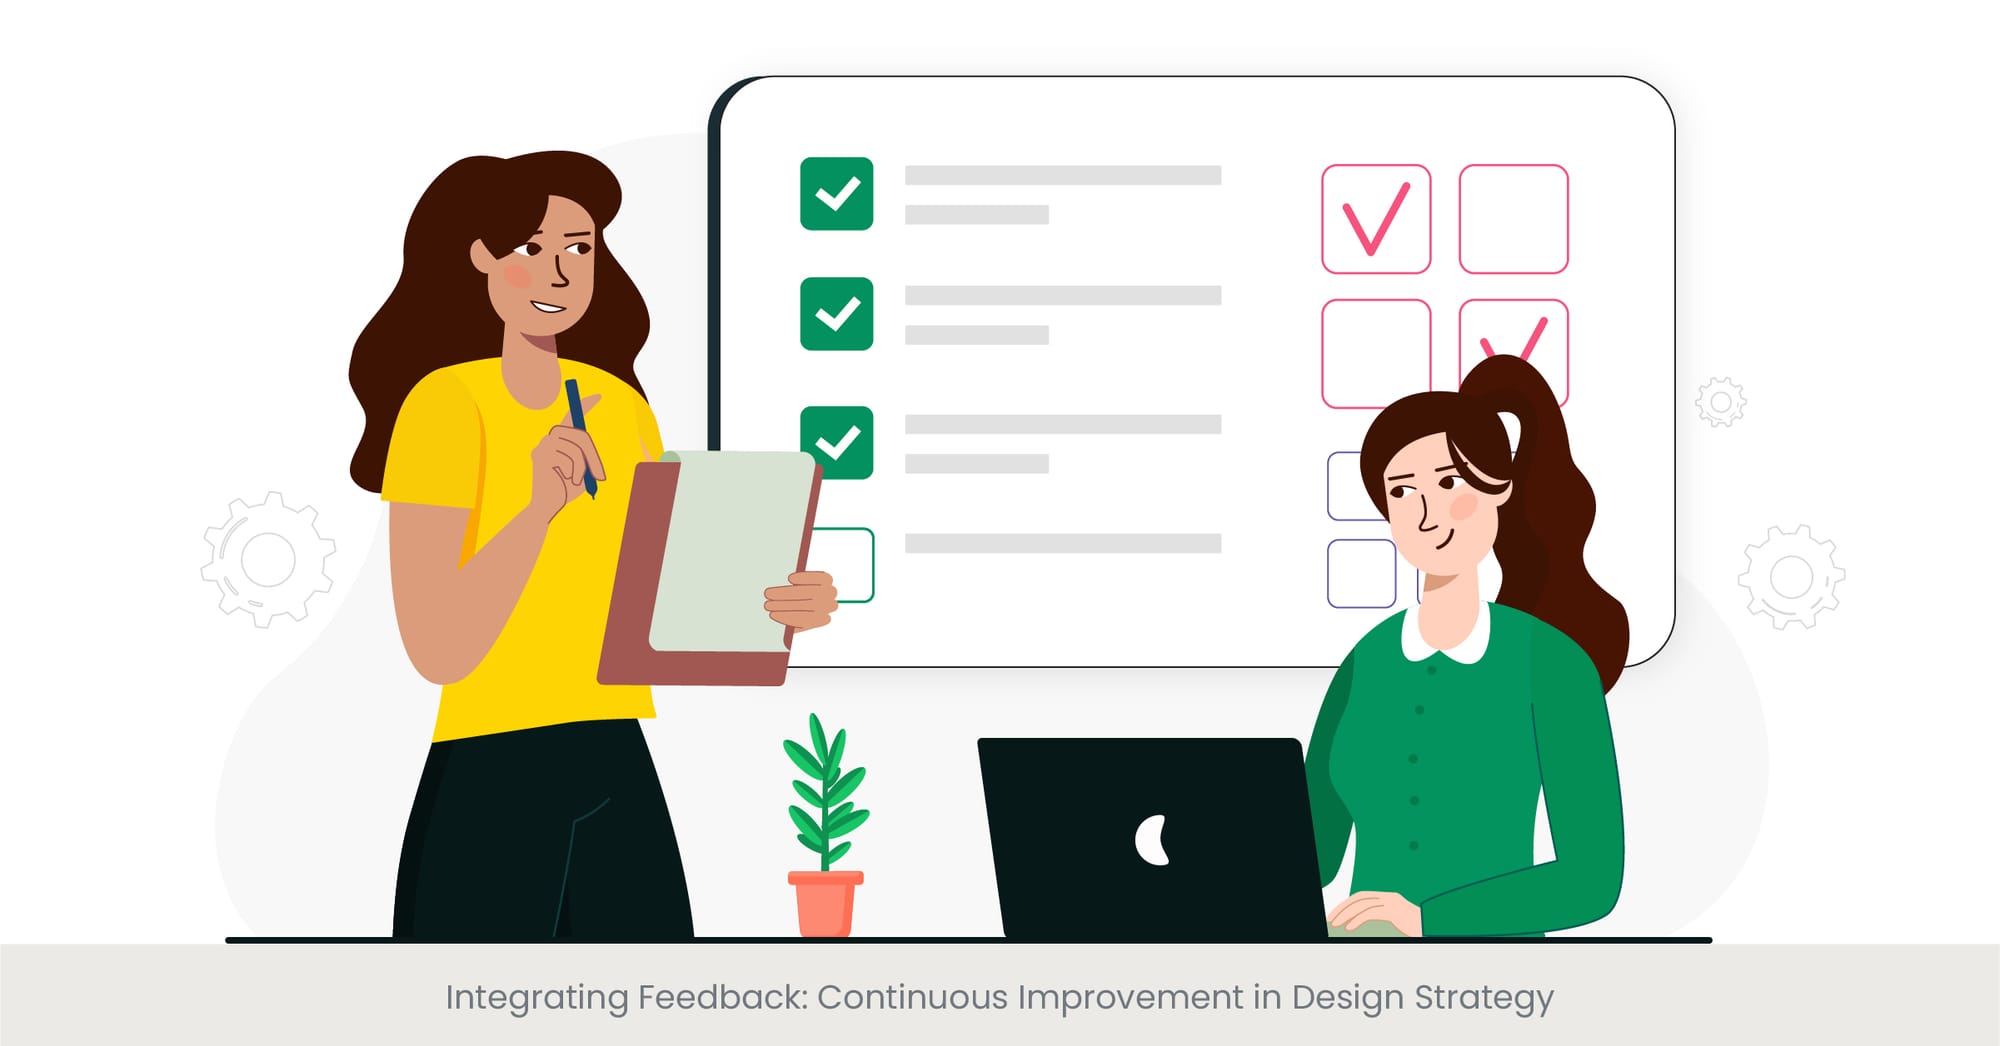 Integrating Feedback: Continuous Improvement in Design Strategy